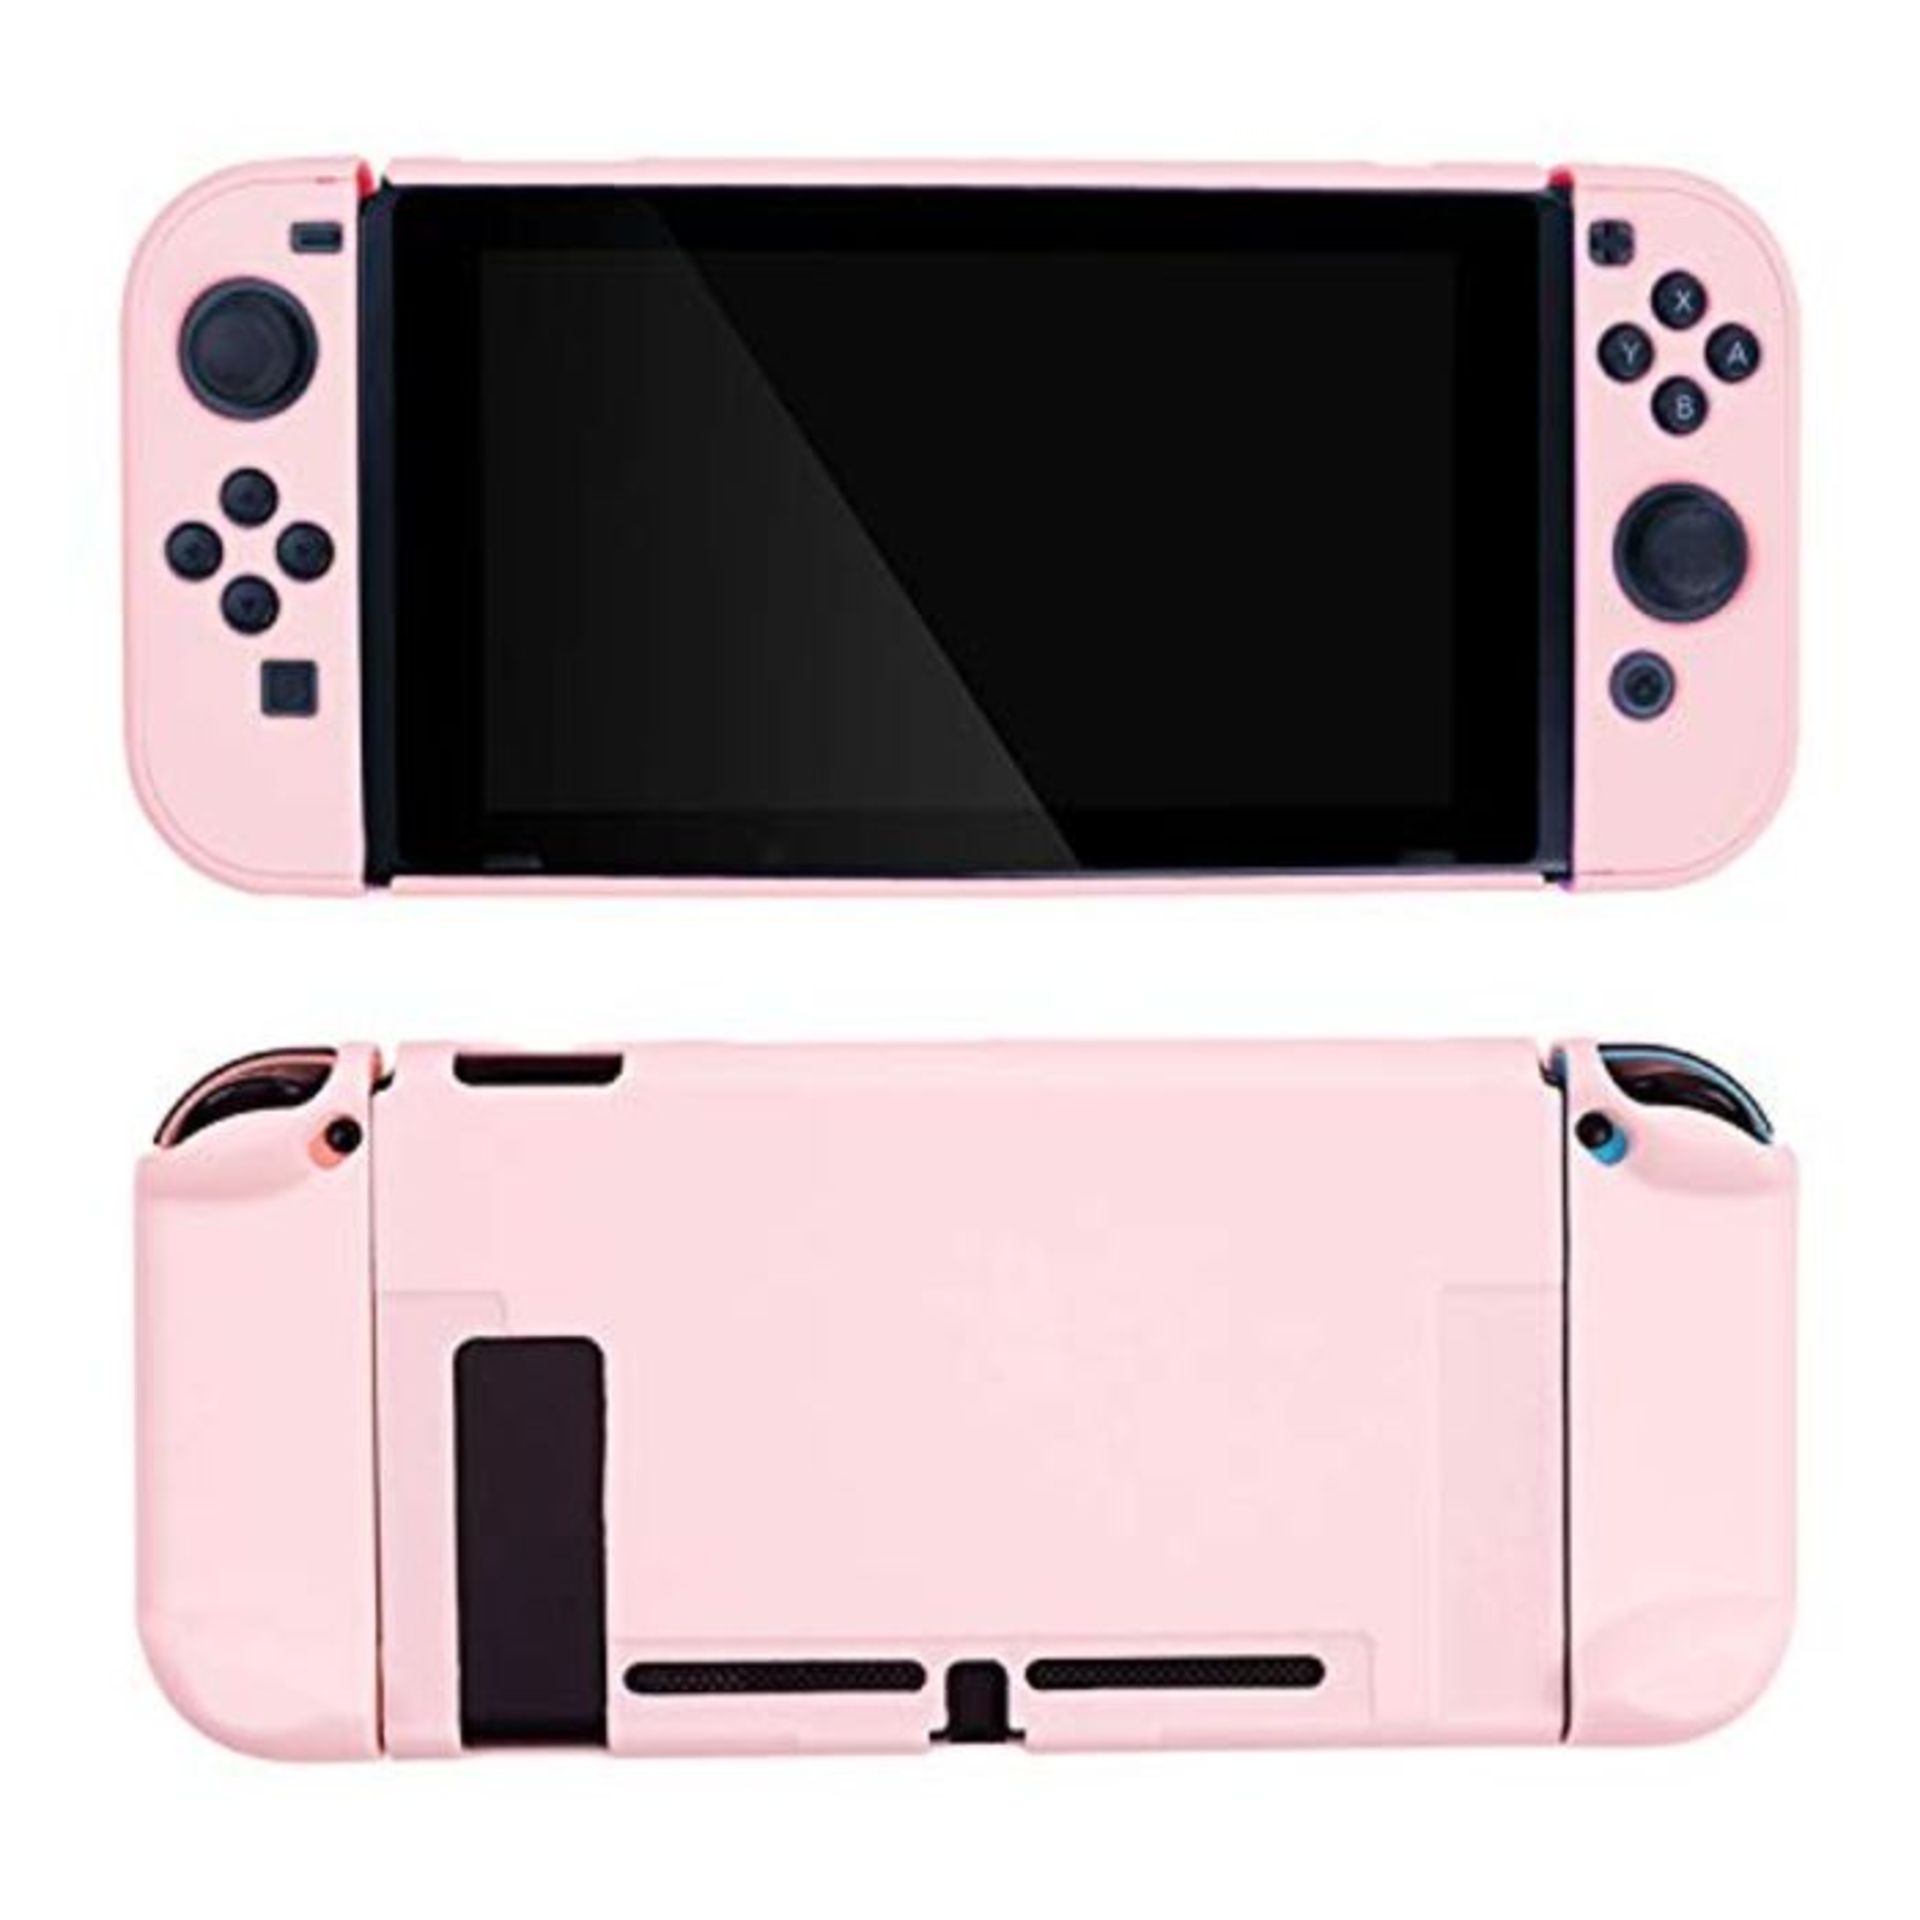 U Core Protective Case for Nintendo Switch, Soft Touch DIY Replacement Case Cover Shel